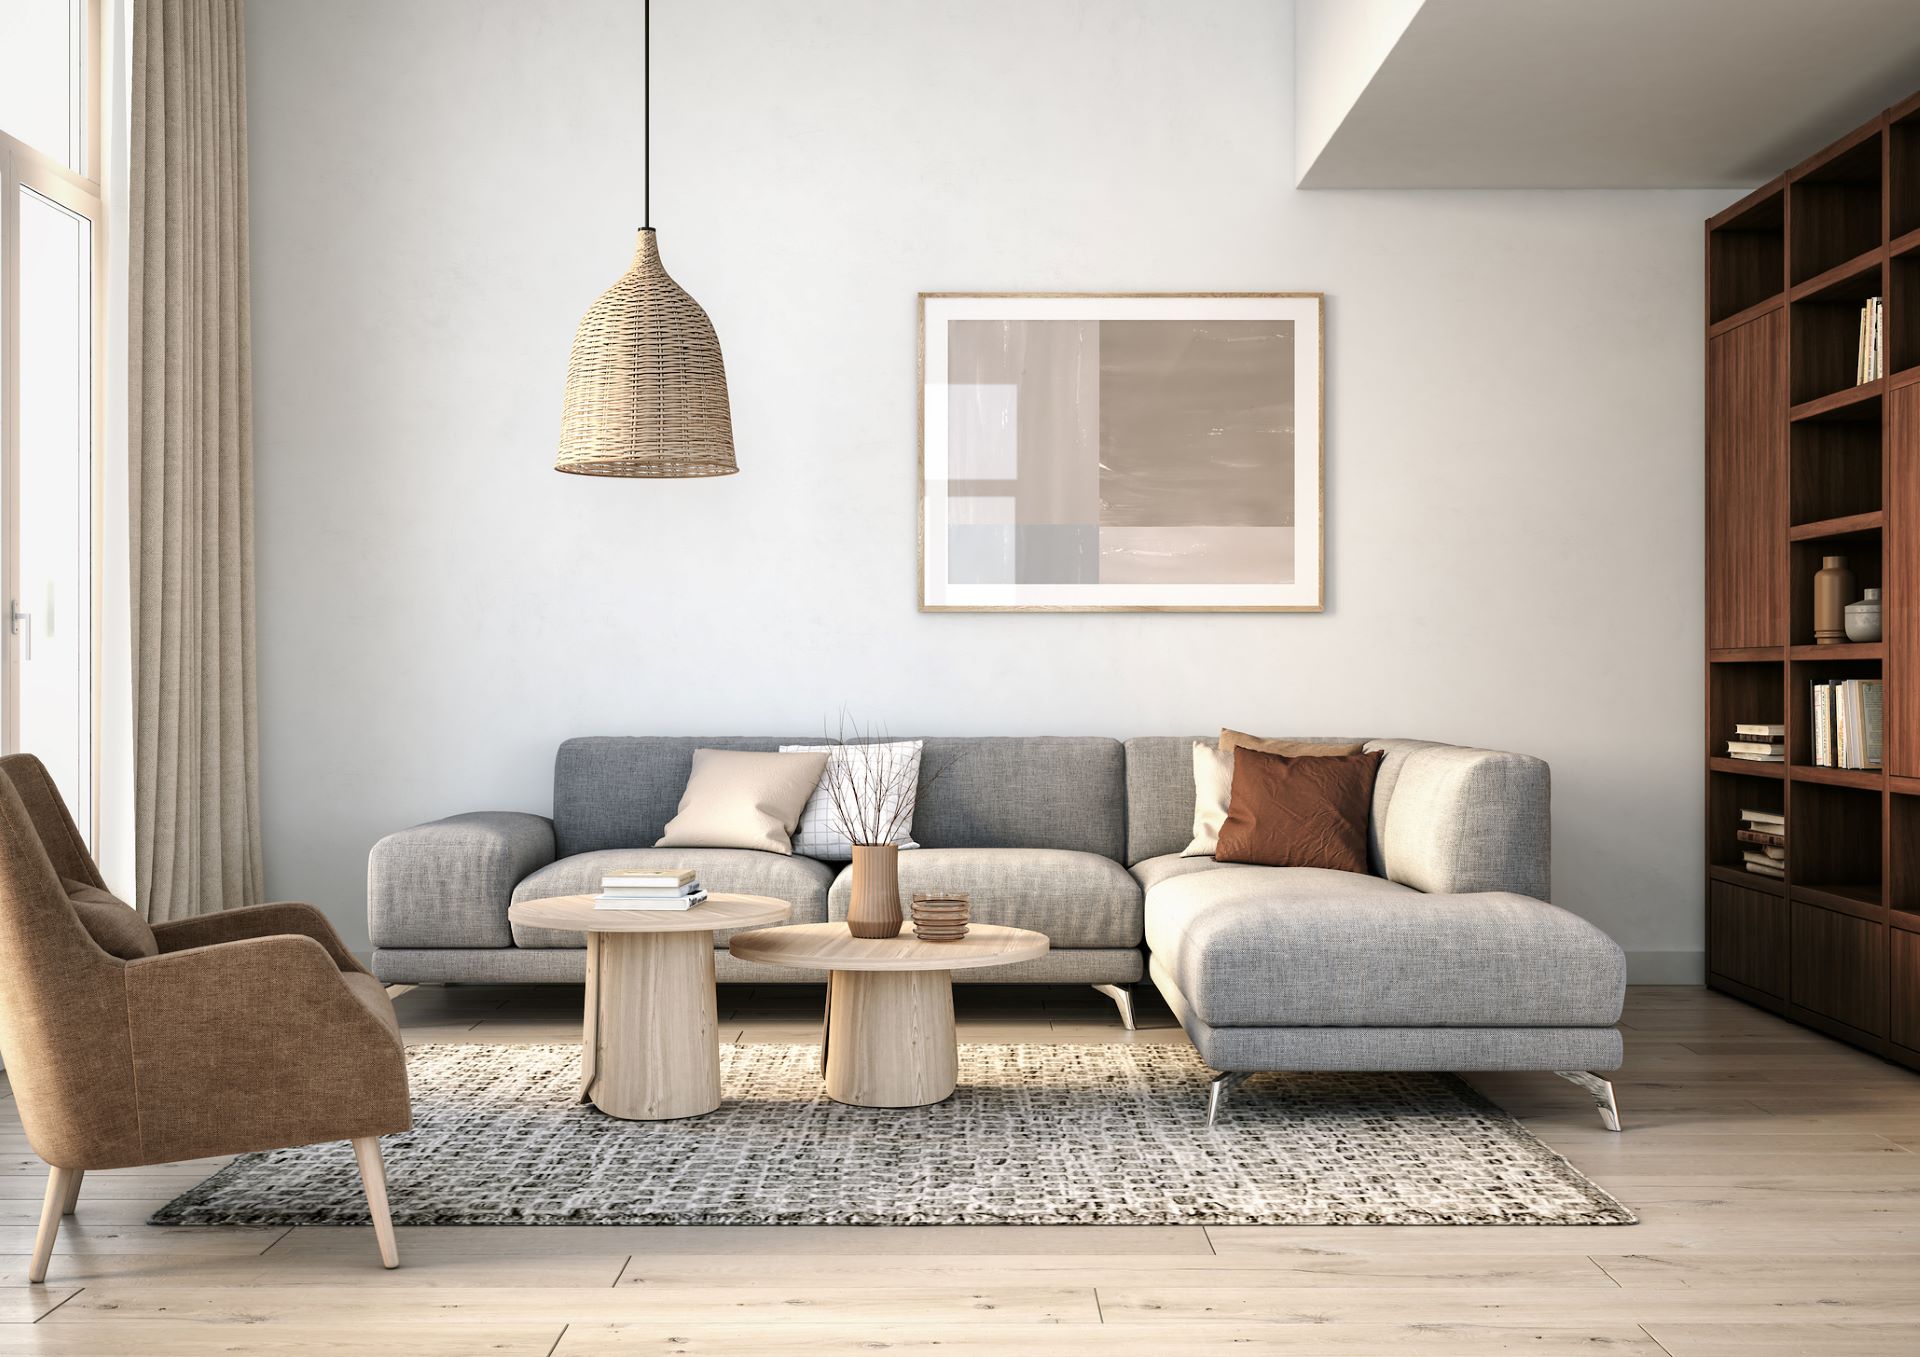 Scandinavian Furniture: Affordable And Chic Options For Your Home